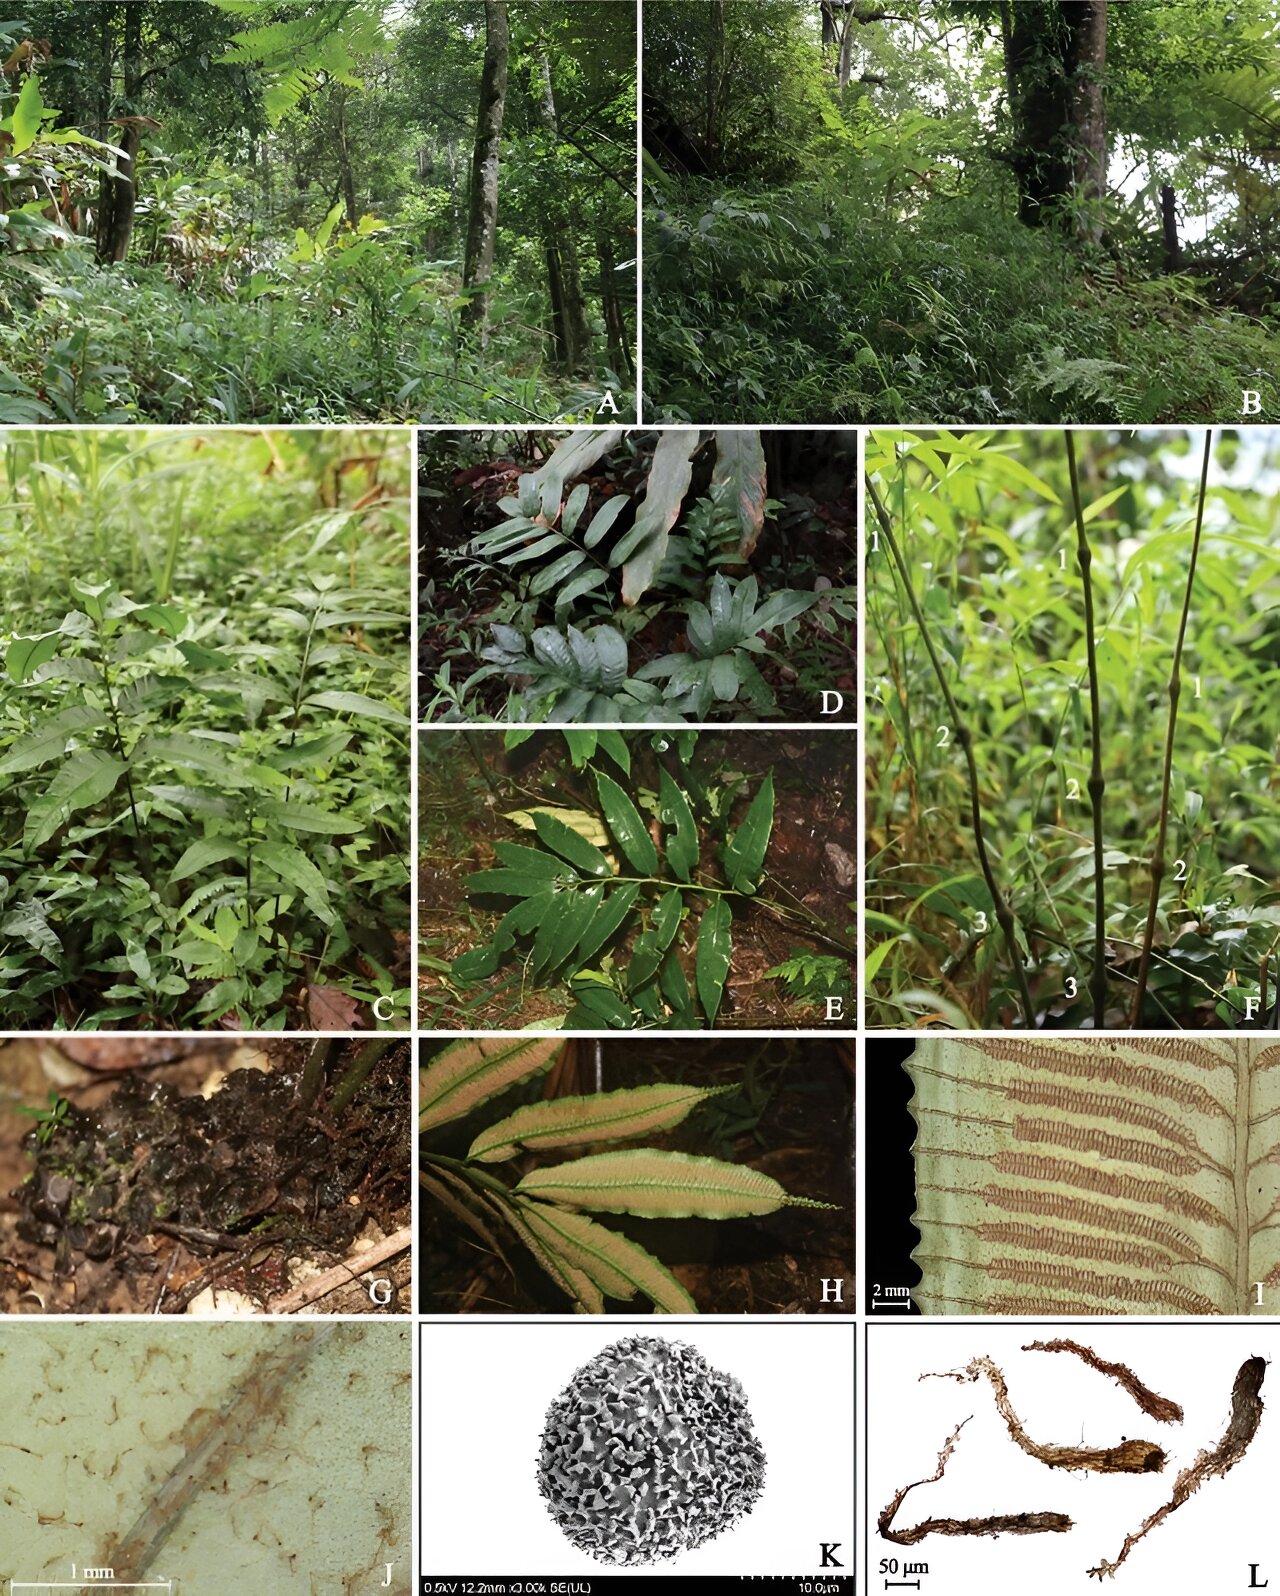 Researchers report new fern species from Yunnan, China